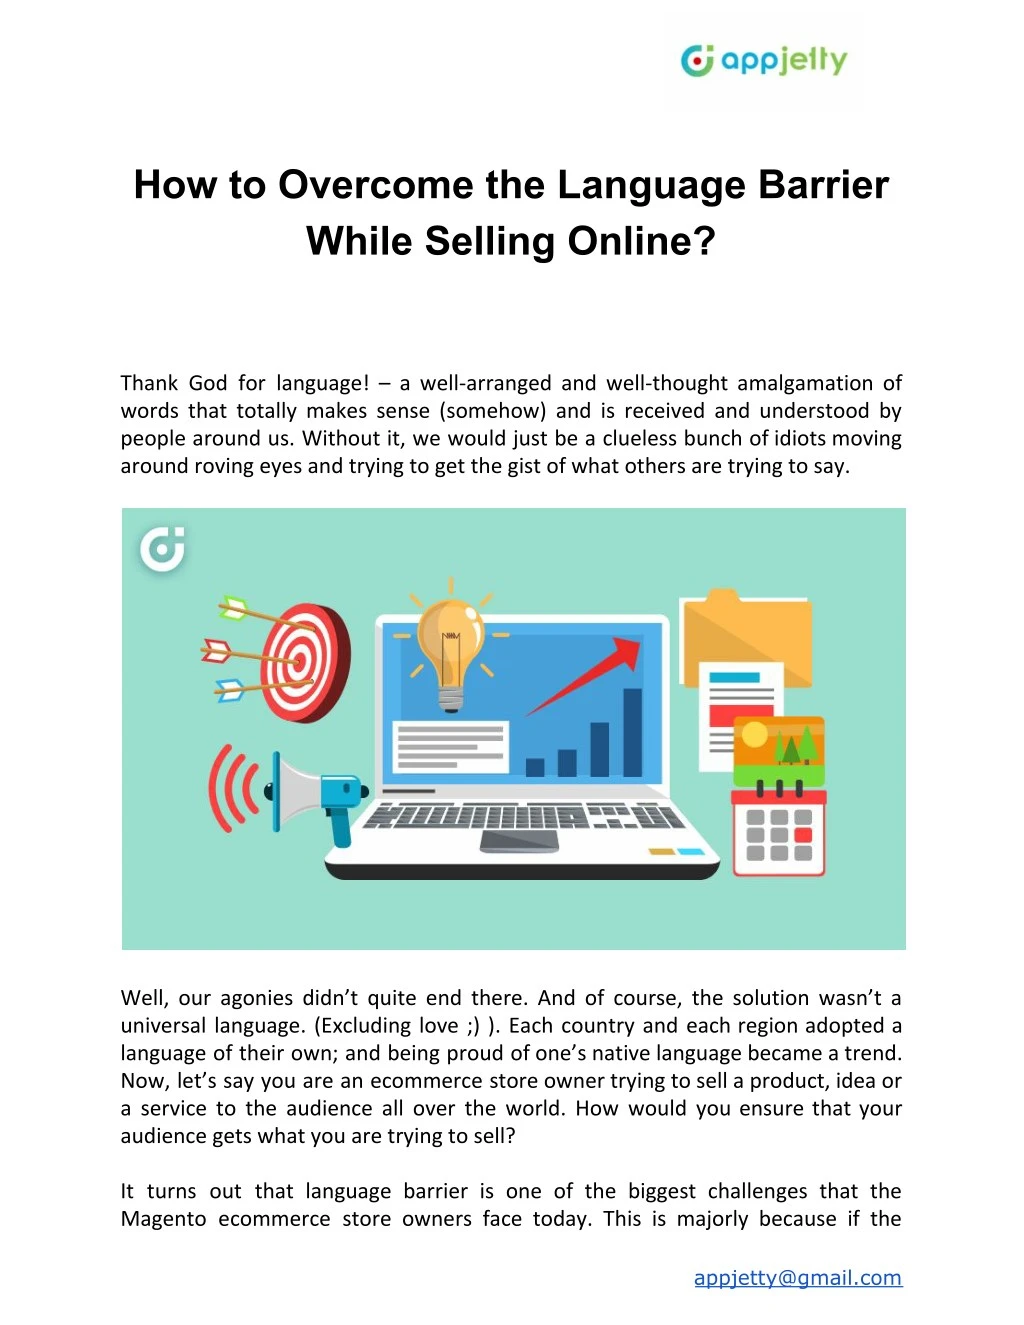 how to overcome the language barrier while